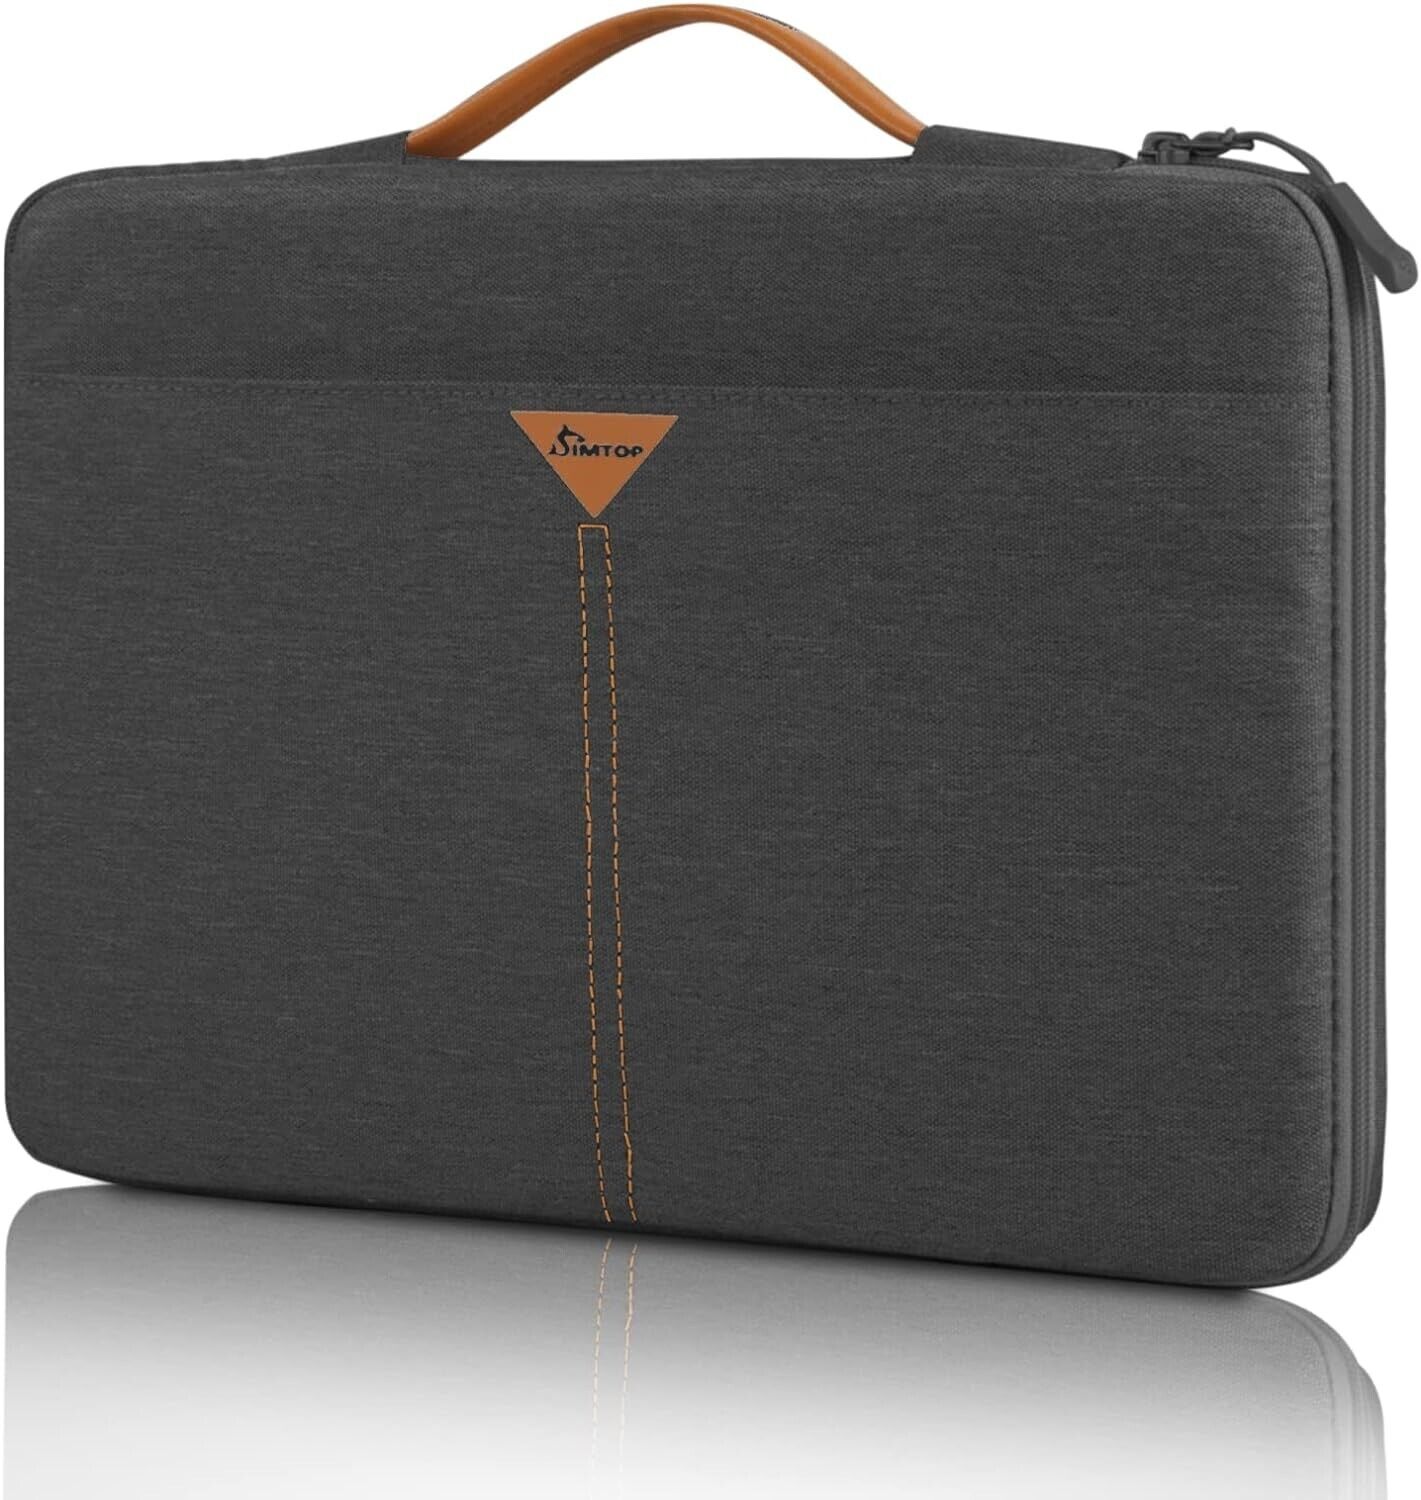 Laptop Sleeve Case with Handle for 13.3-inch New MacBook Air - Simtop bag